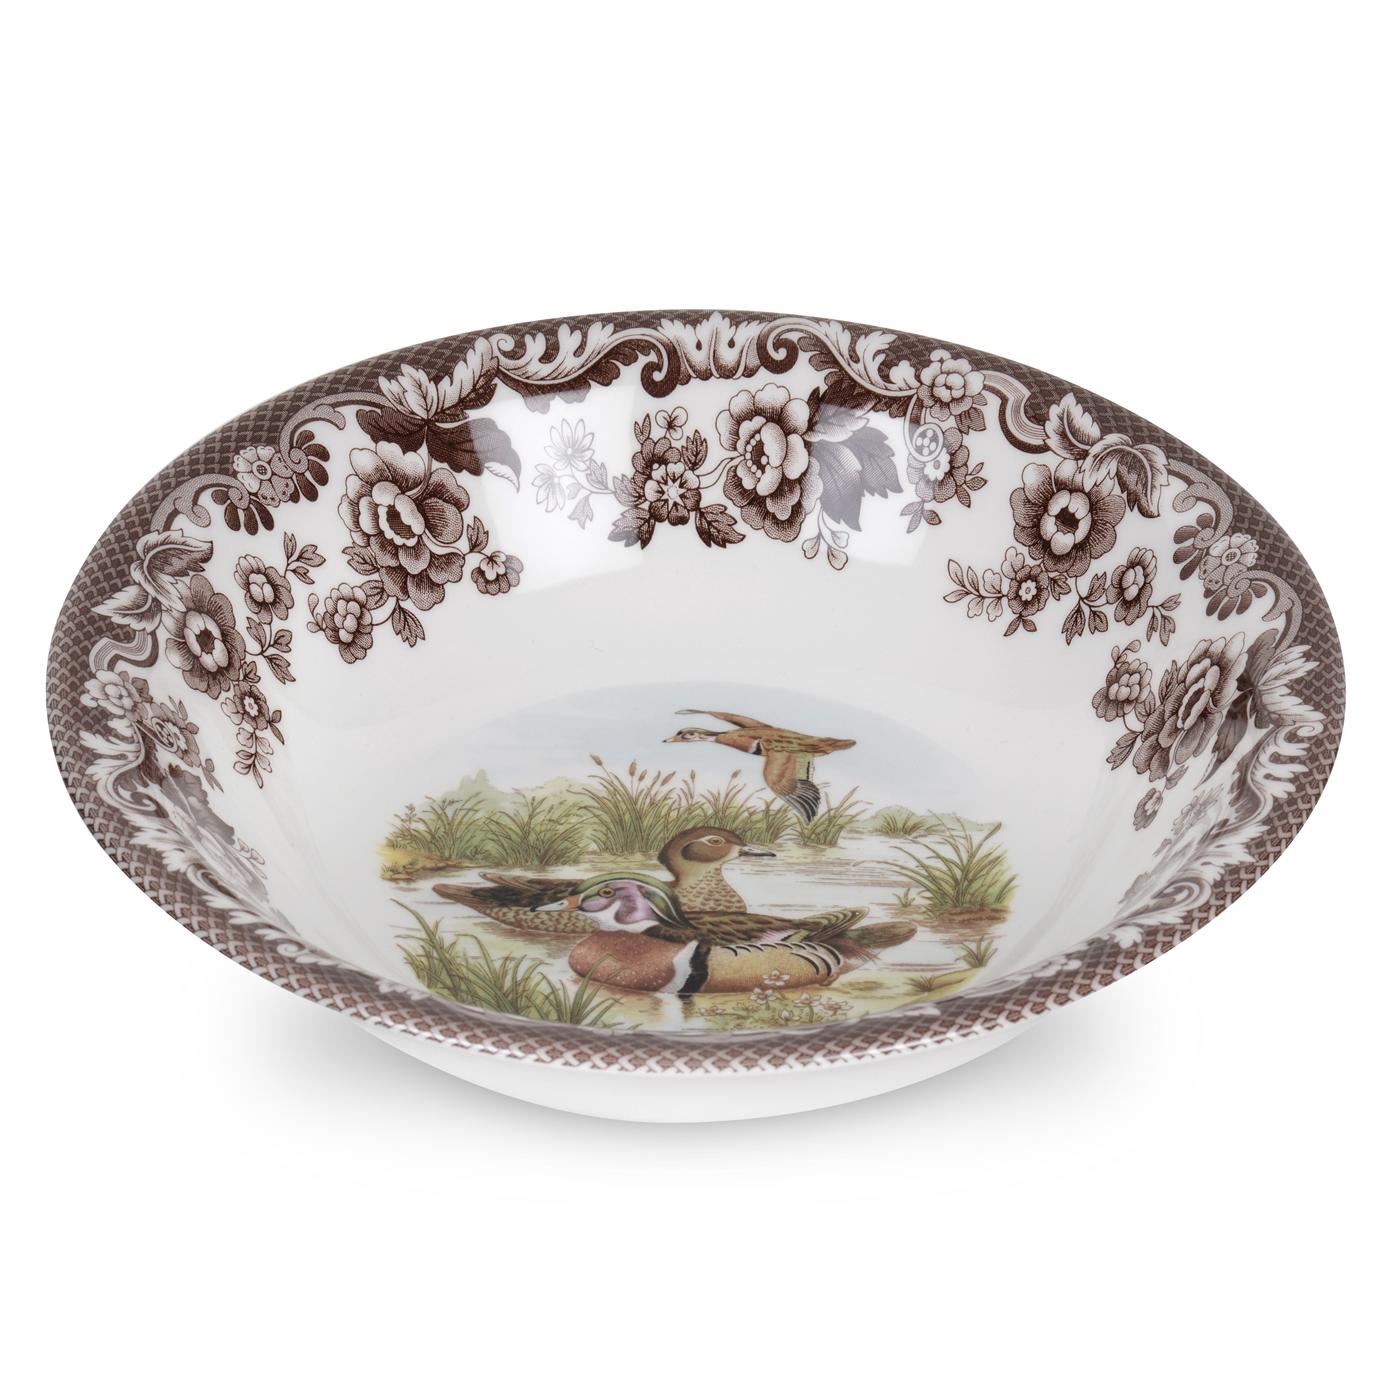 Woodland Ascot Cereal Bowl 8 Inch, Wood Duck image number null